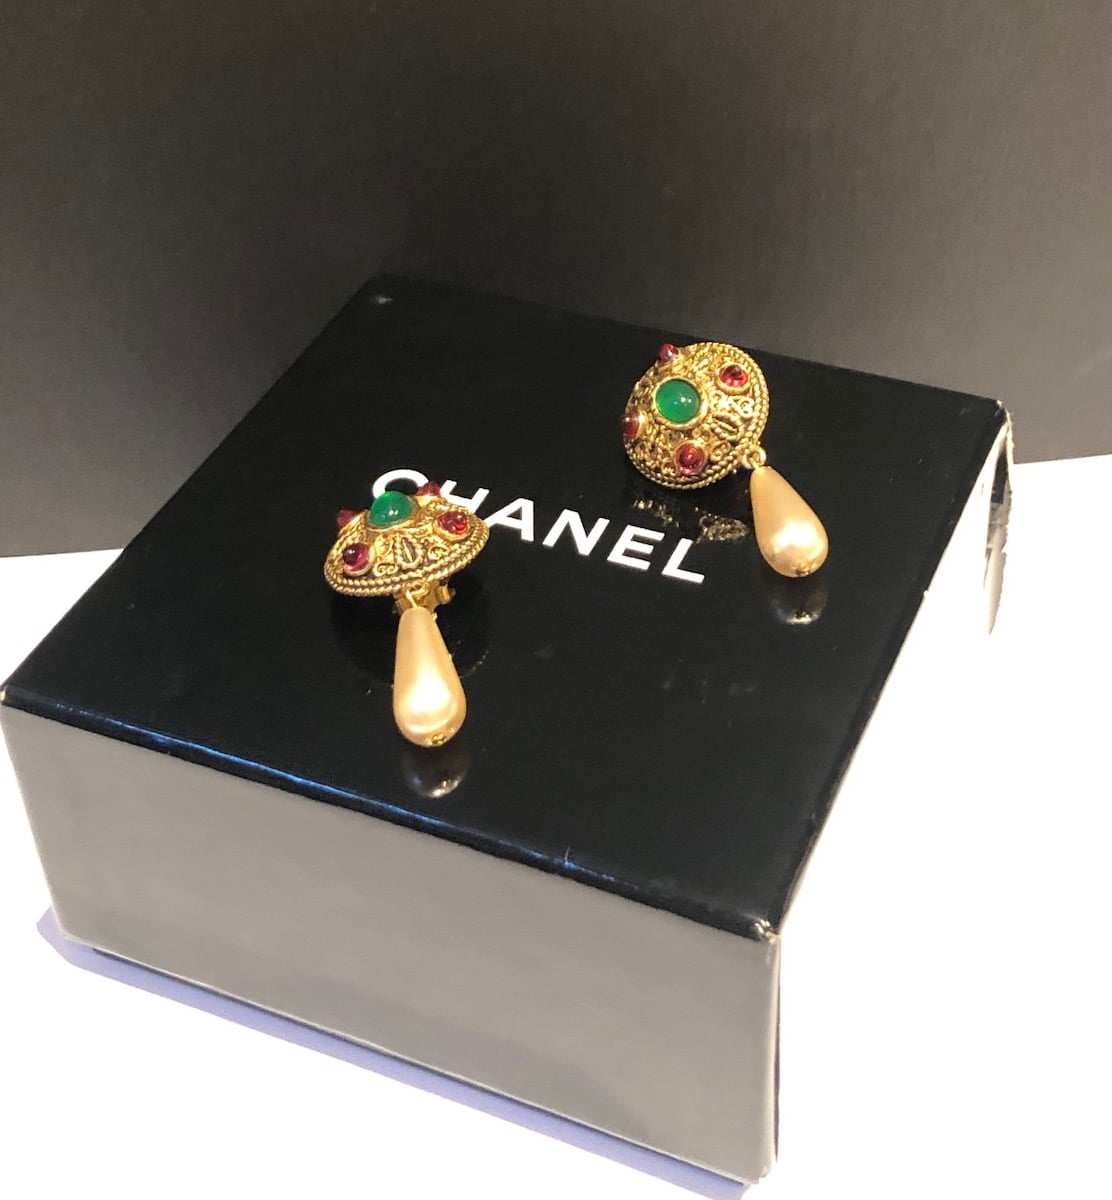 CHANEL Vintage Gold Metal Green and Pink Gripoix Pearl Drop Earrings 1980s  - Chelsea Vintage Couture